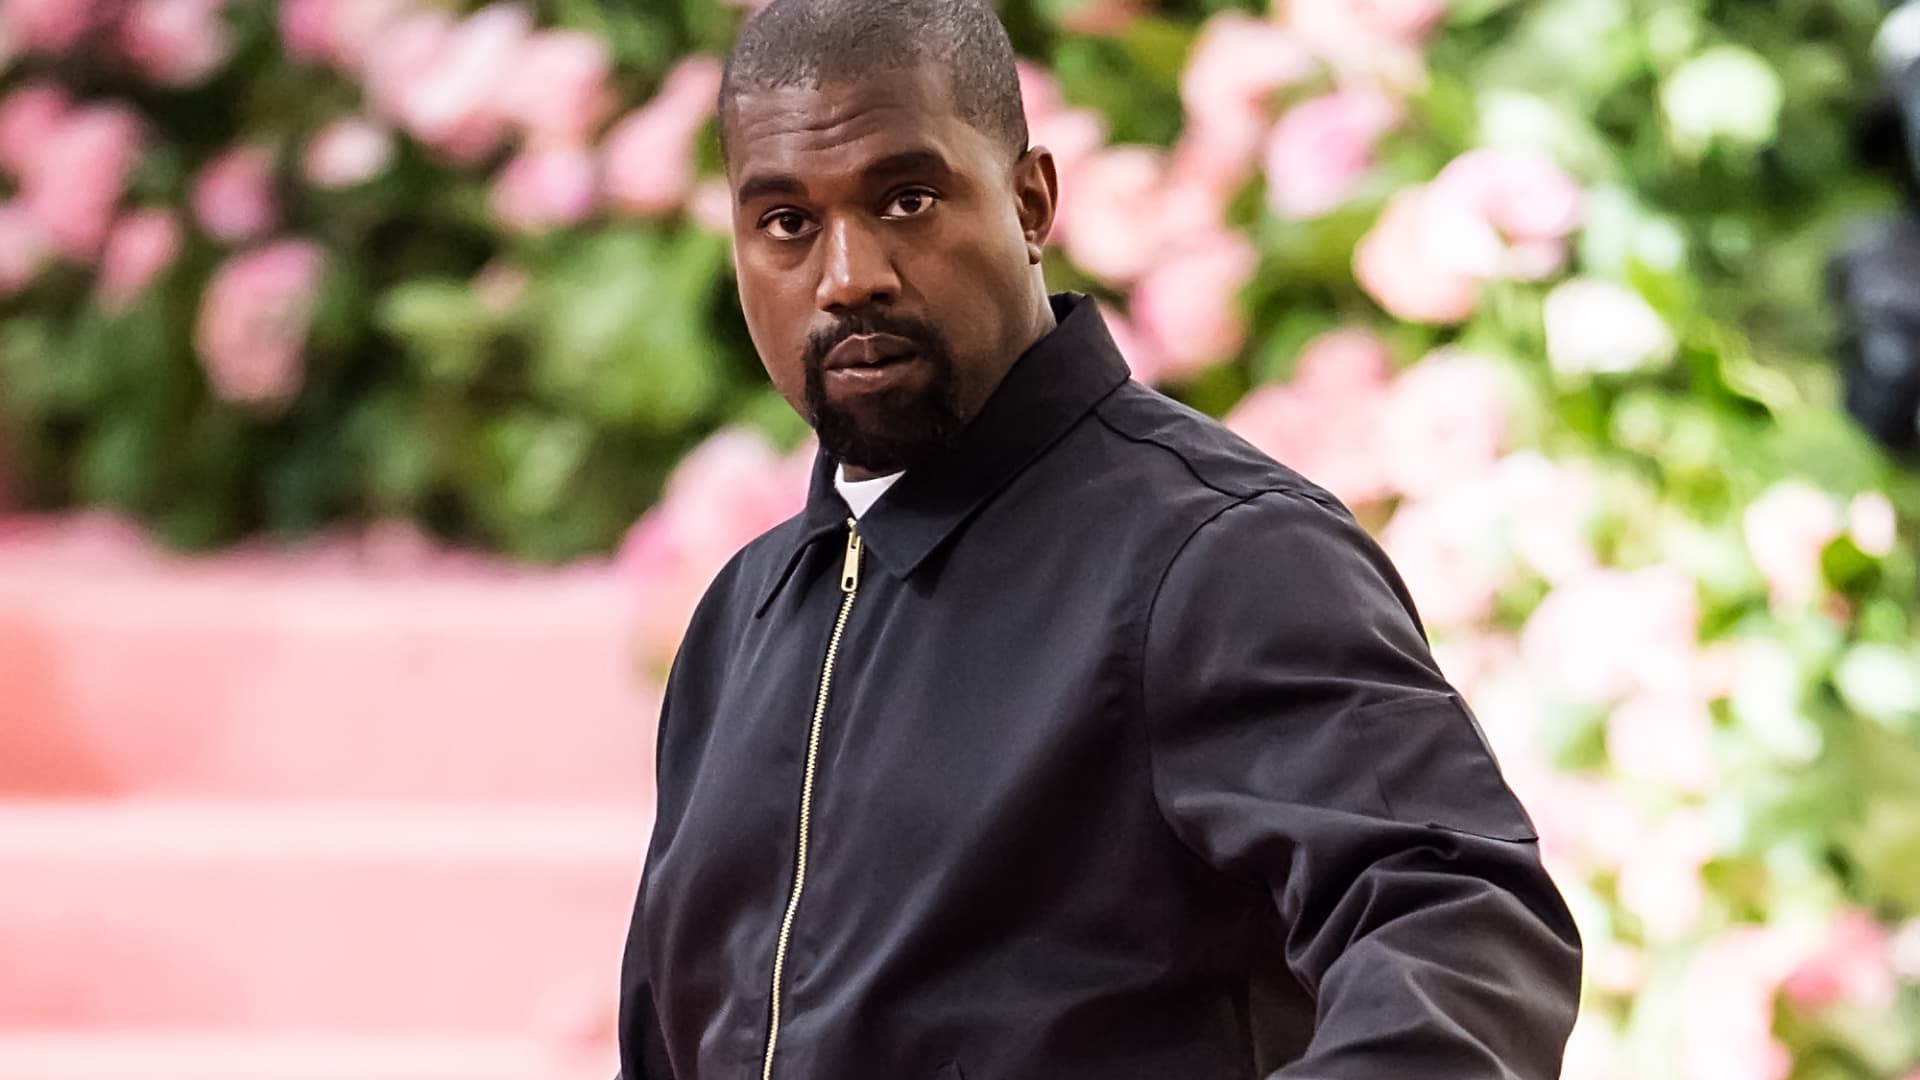 Adidas employees raised concerns about Ye’s conduct for years, report says
– News X